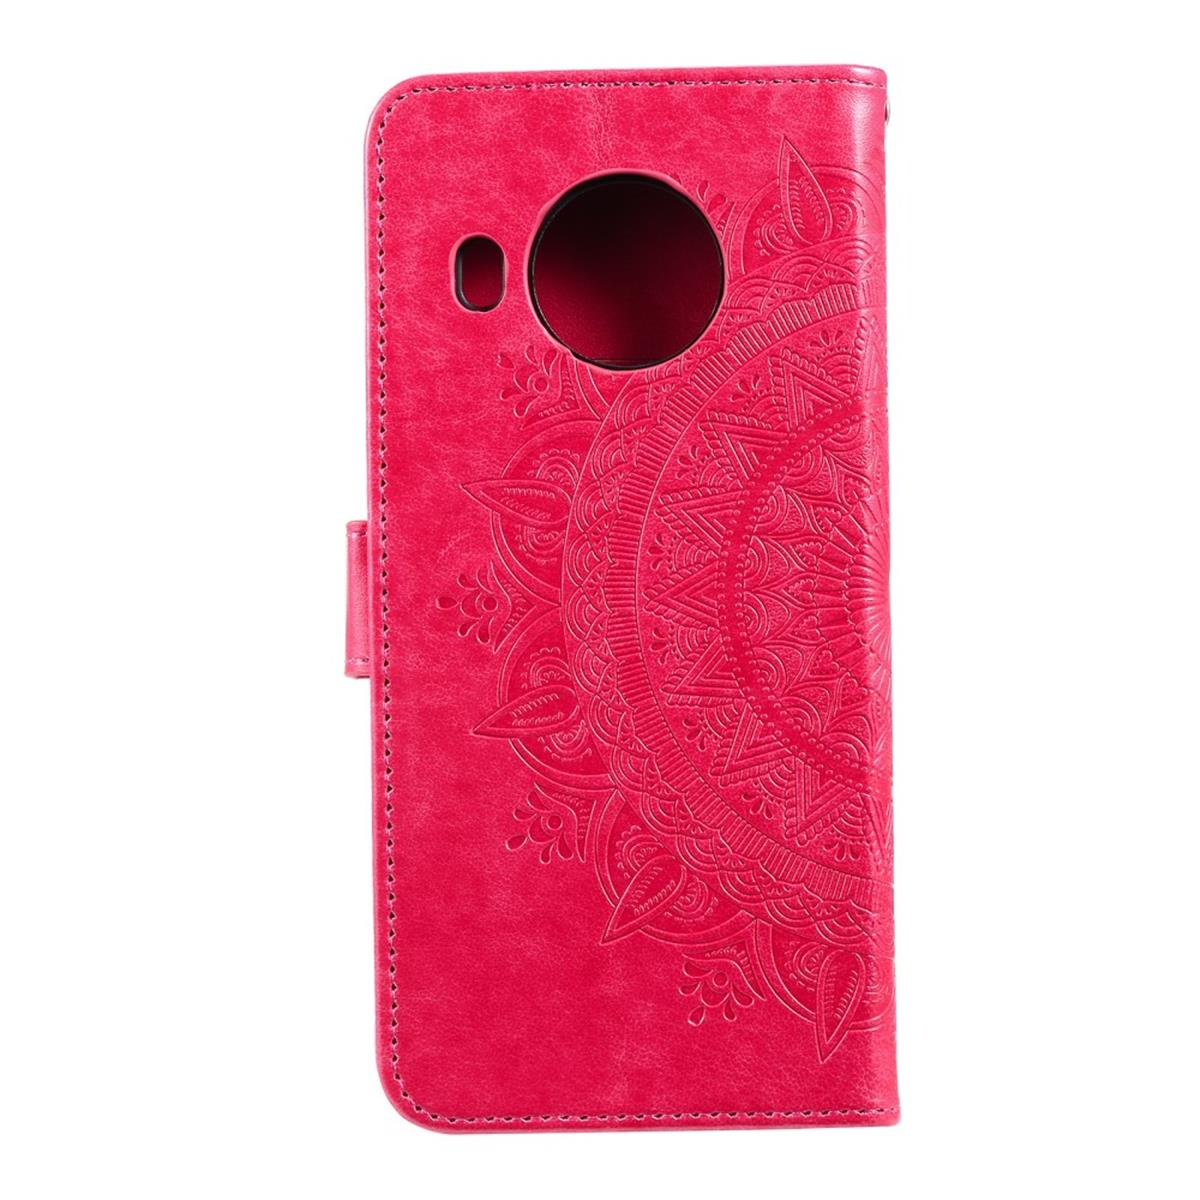 mit Bookcover, COVERKINGZ Muster, Mandala Klapphülle Pink Nokia, X10/X20,